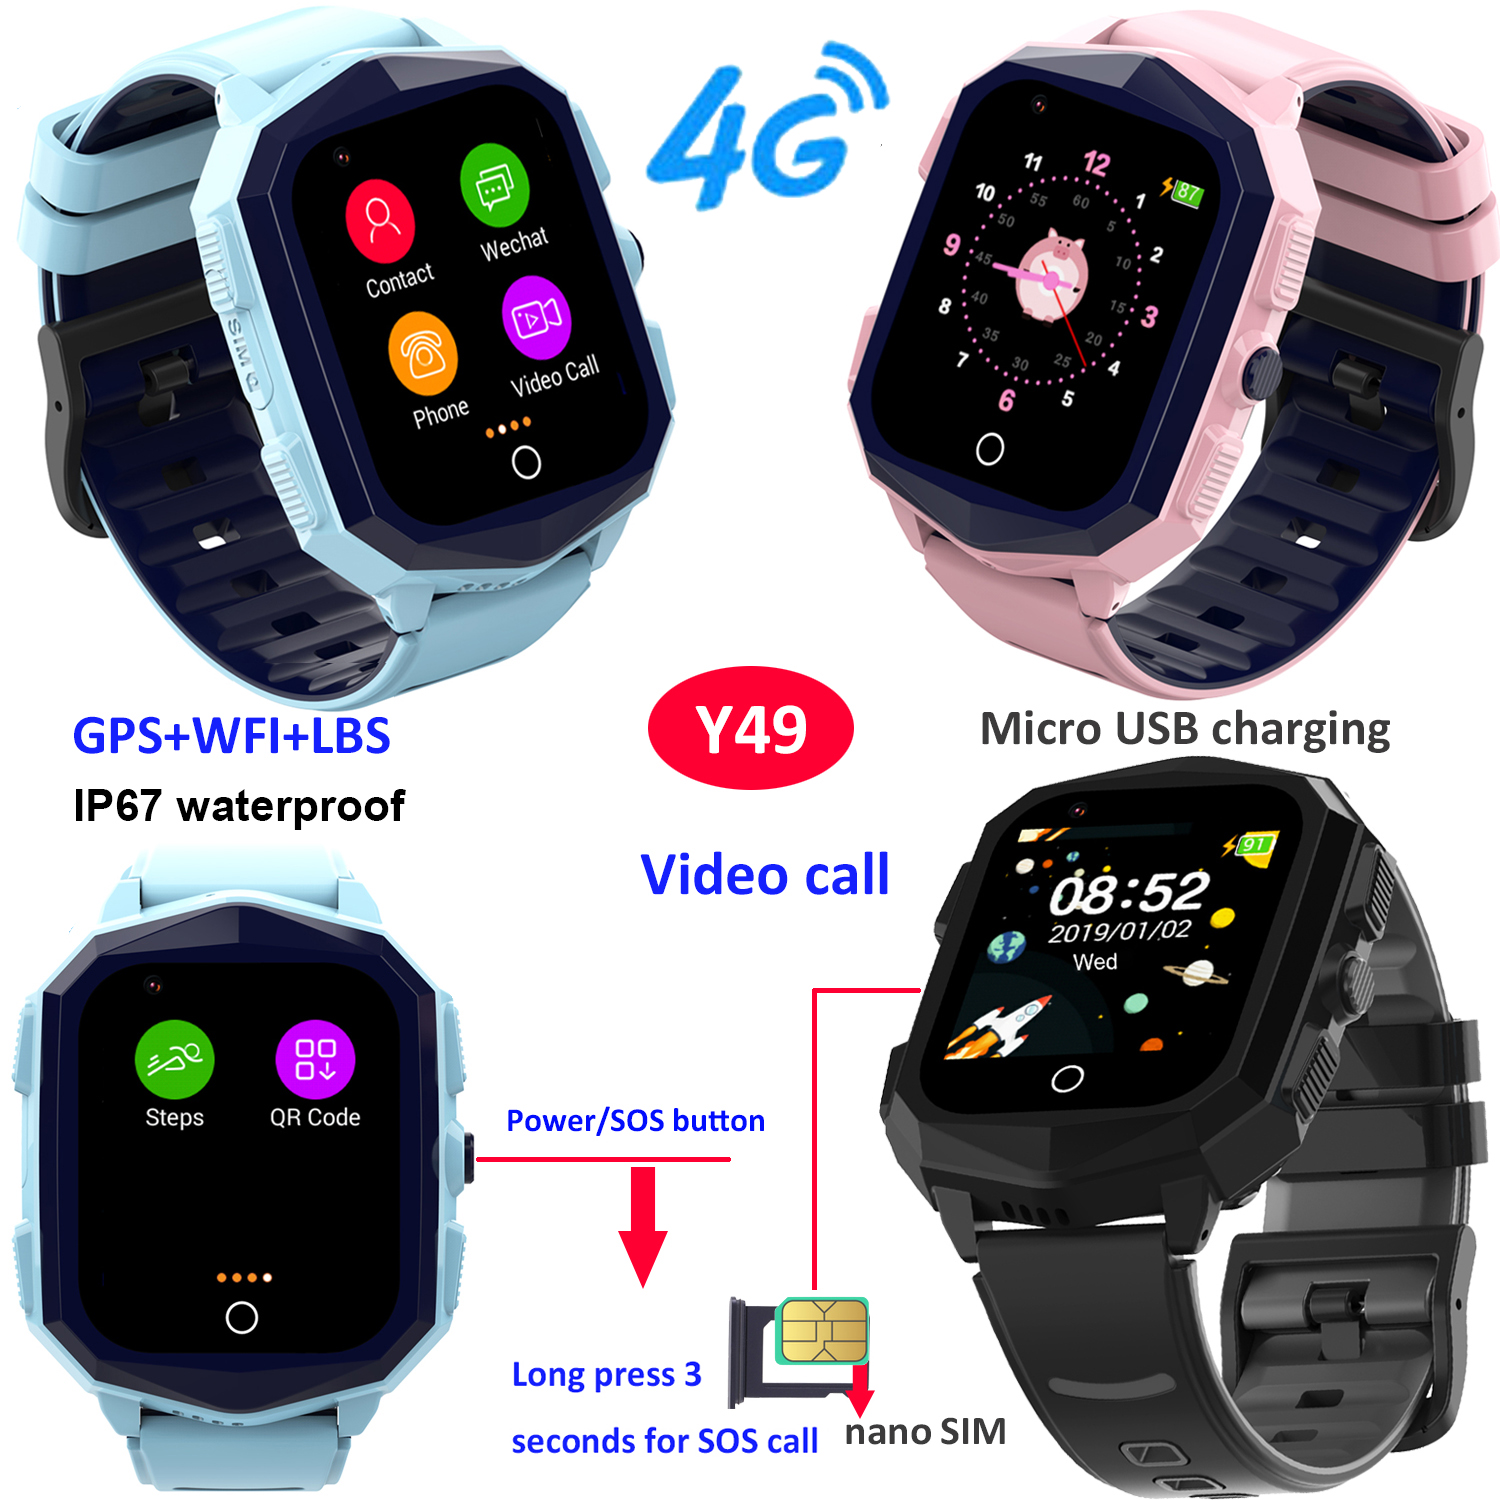 4G LTE IP67 waterproof Colorful Touch Screen Kids GPS Smart watch with History Tracking Free Global Video Call for students School boys Girls Y49